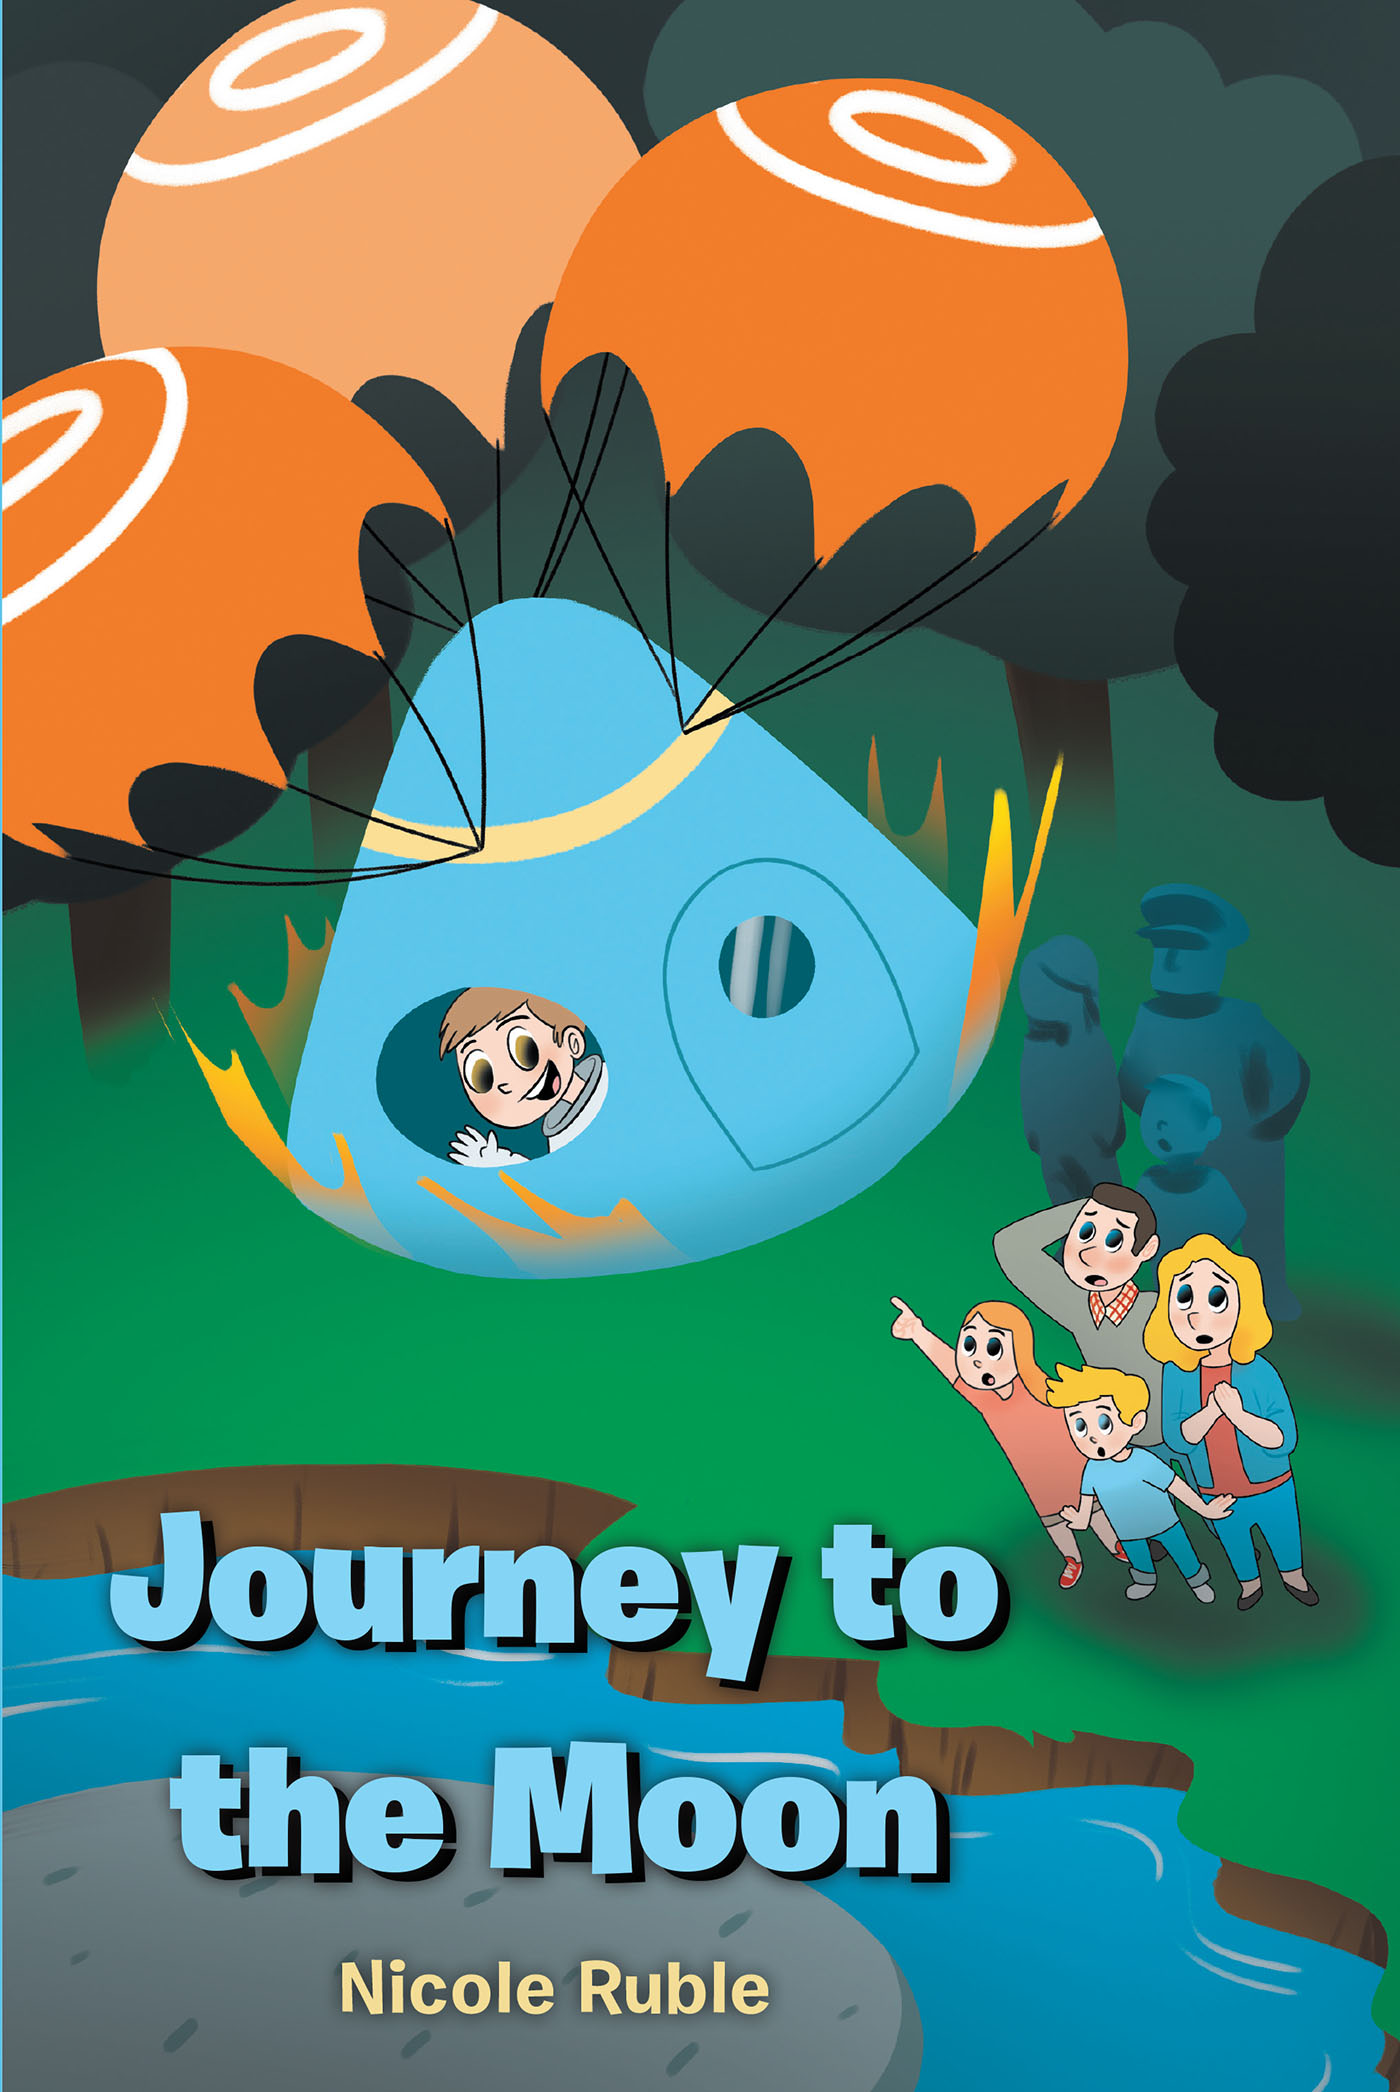 Nicole Ruble’s Newly Released "Journey to the Moon" is a Delightful Juvenile Fiction That Pairs a Fun Adventure with a Passion for Space Exploration